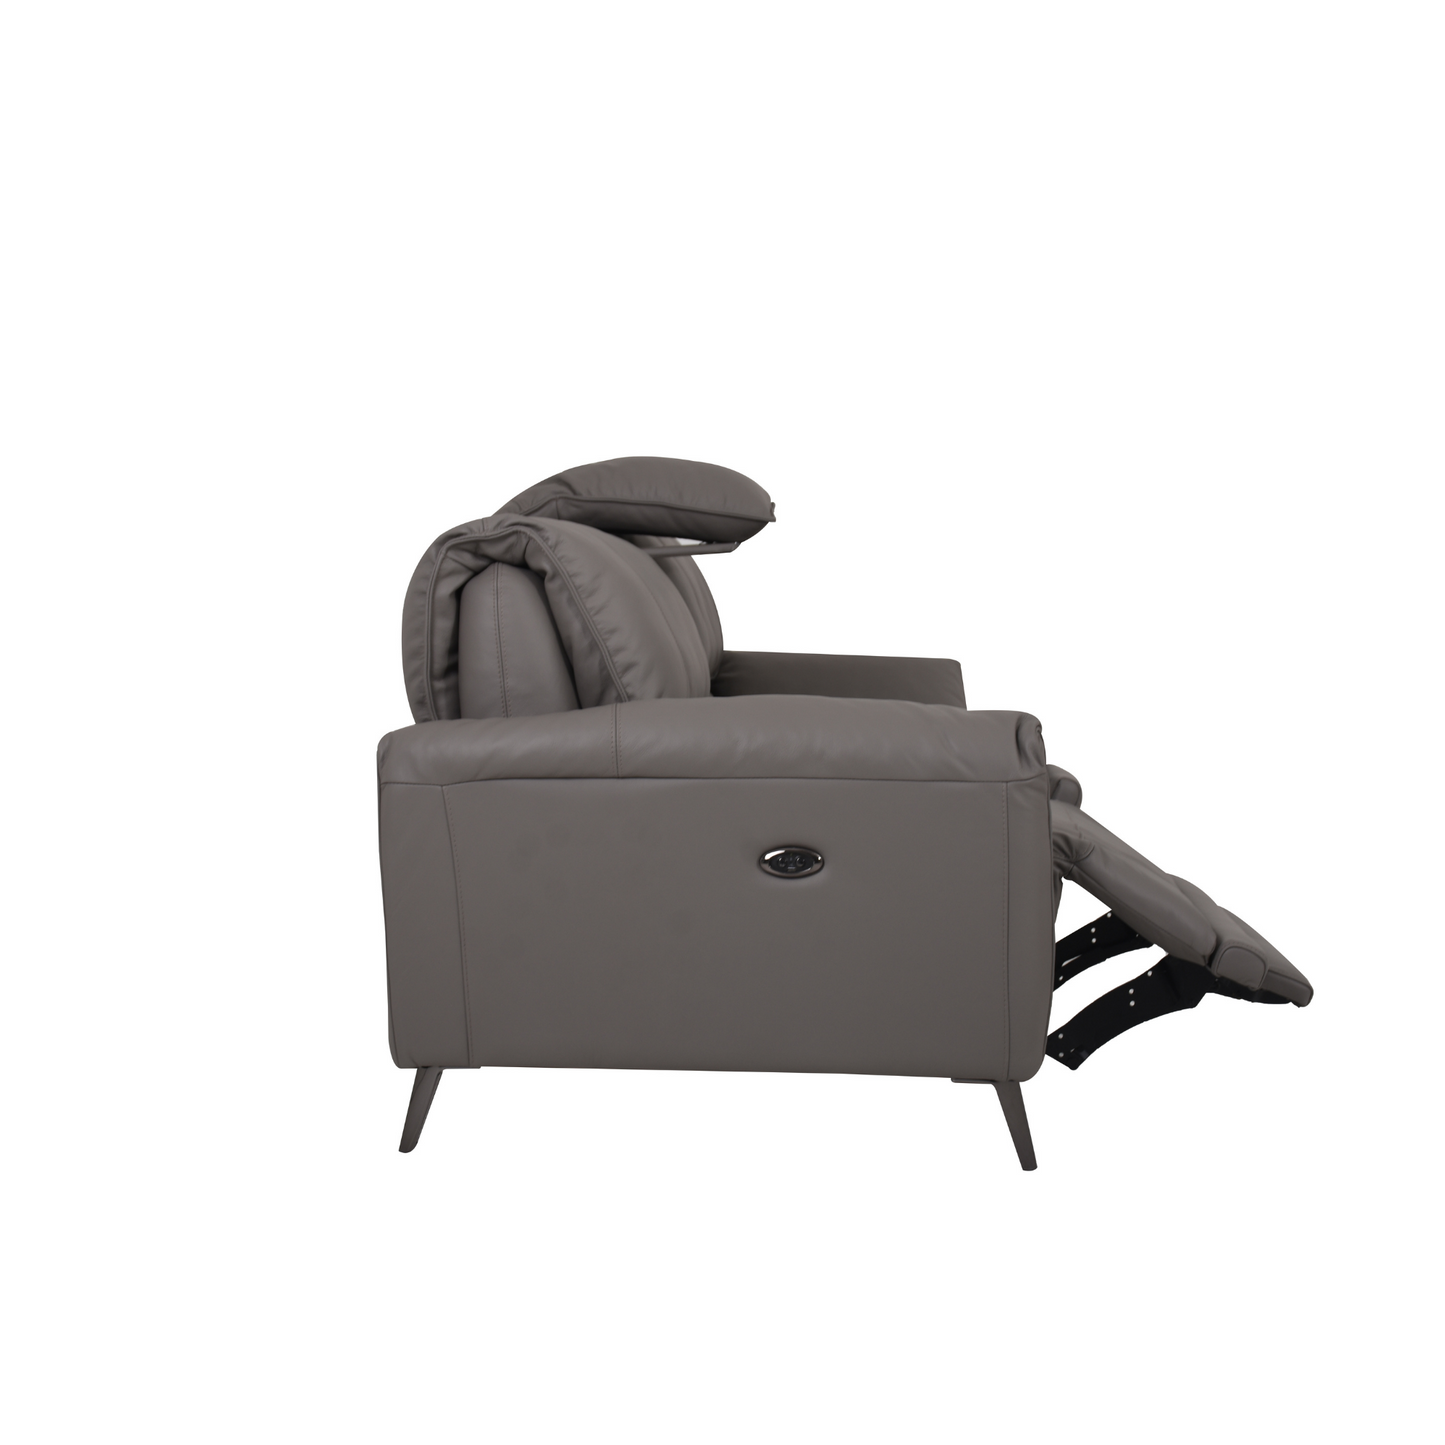 California 2.5-Seater Recliners in Elephant Grey Leather